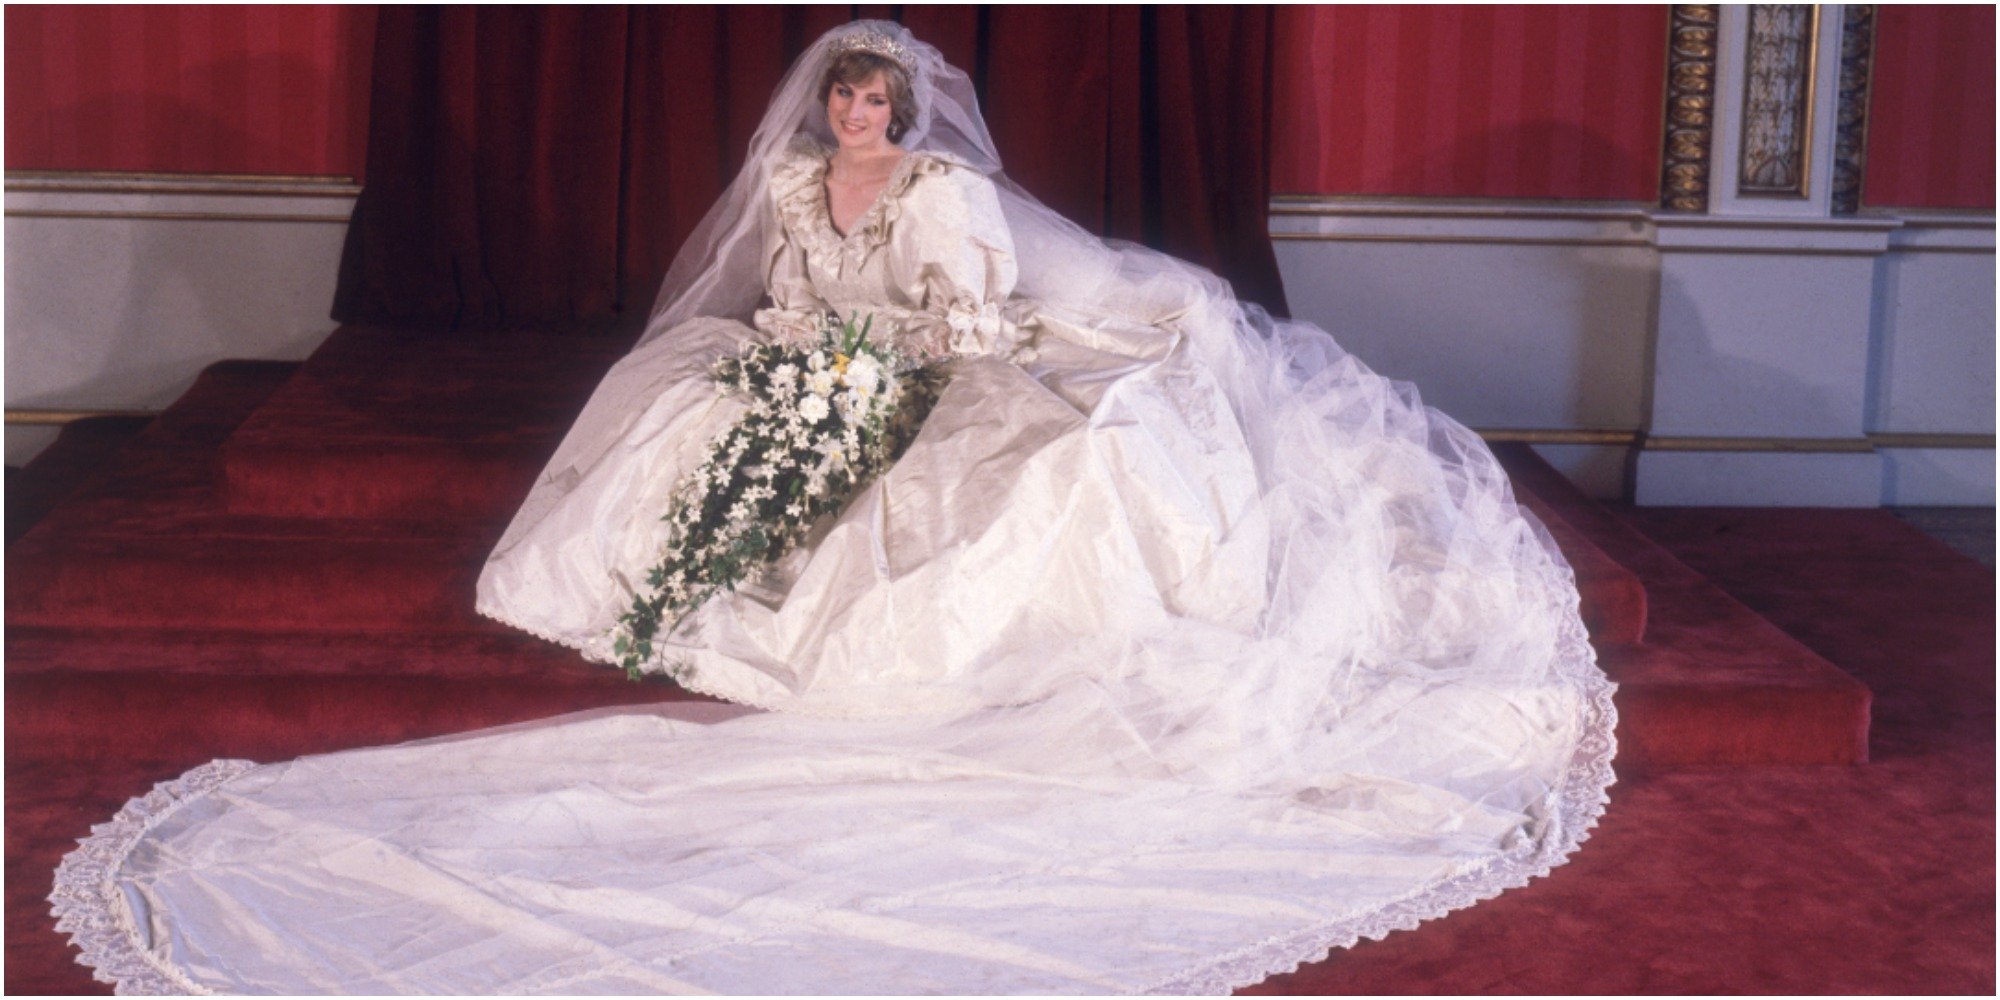 Priceless Princess Diana Wedding Heirloom Gifted to Prince William’s Daughter, Not Harry’s